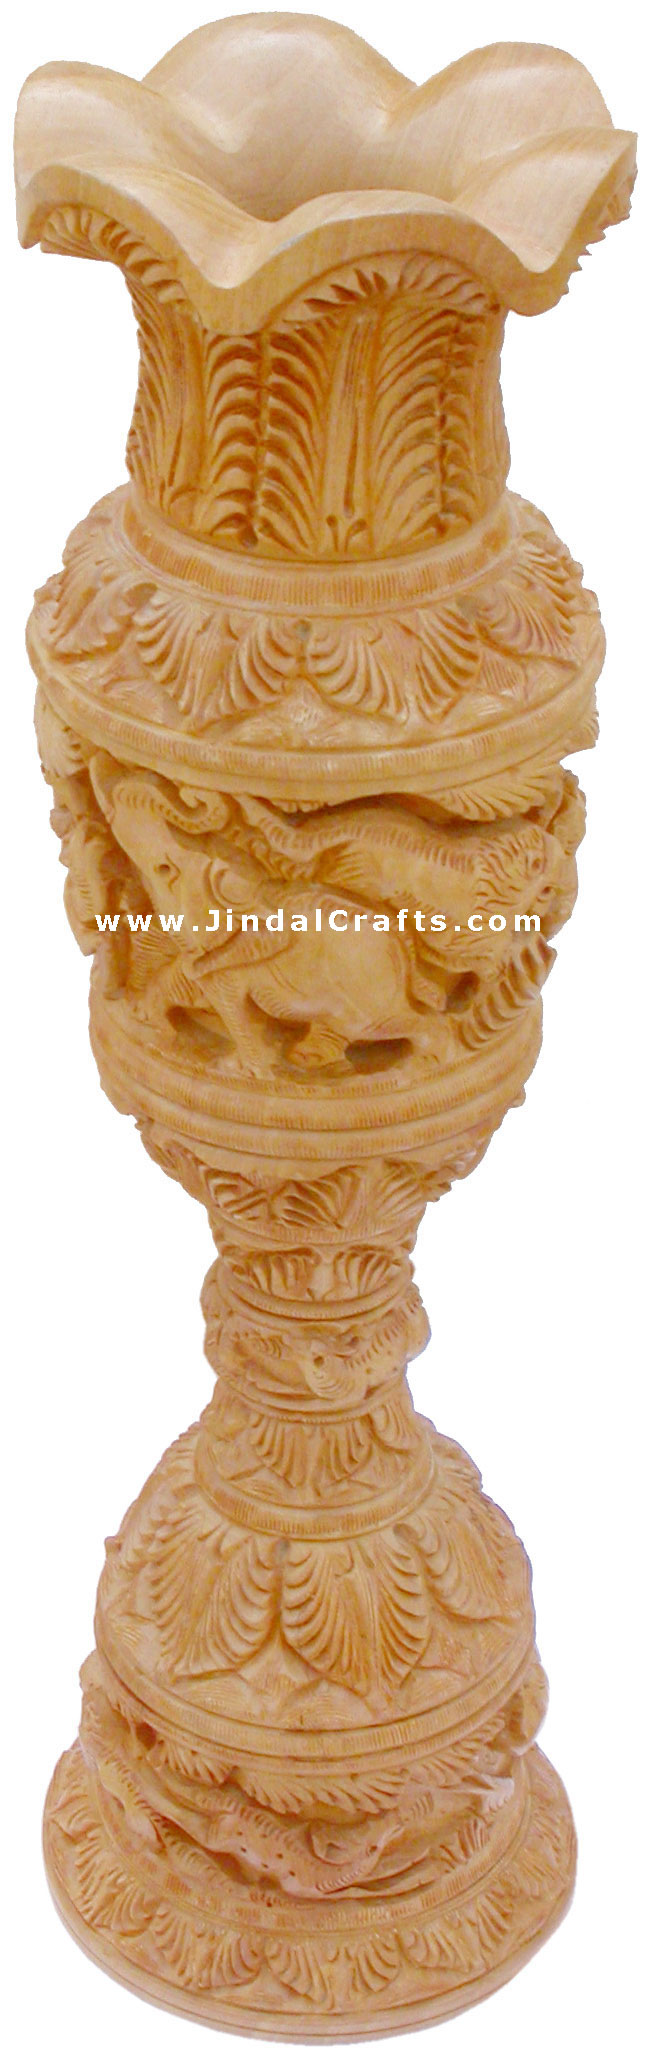 Hand Carved Wooden Vase Jungle Work India Fair Trade